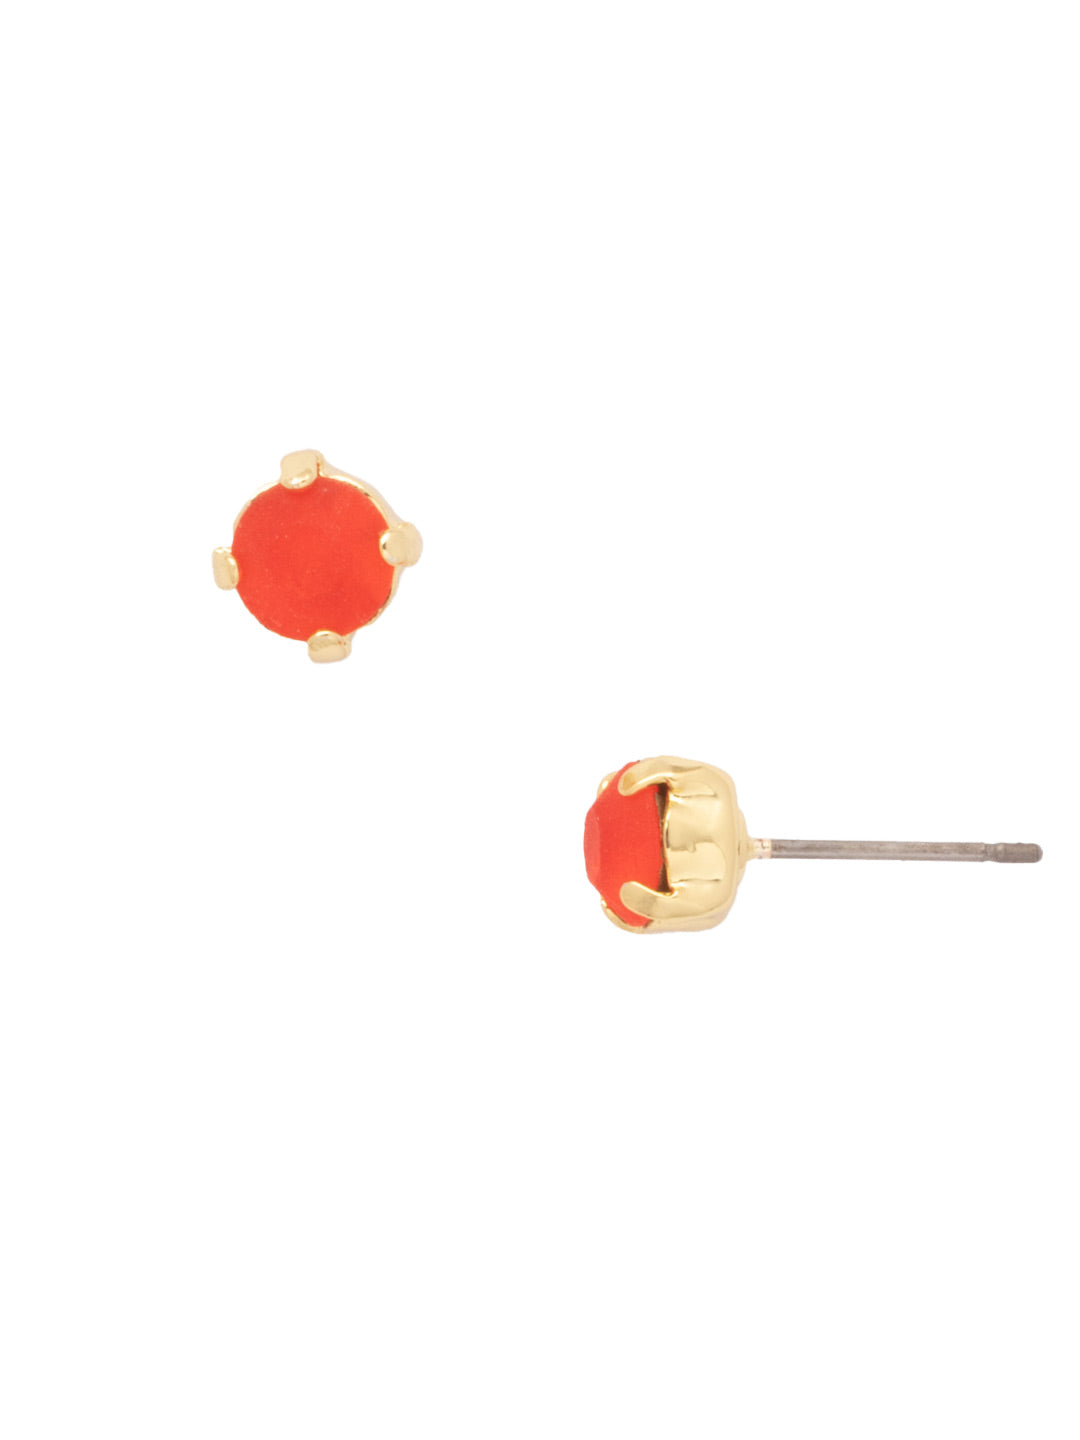 Jayda Stud Earrings - EDN32BGFIS - <p>The Jayda Stud Earrings are the perfect every day wardrobe staple. A round crystal nestles perfectly in a metal plated post with four prongs. </p><p>Need help picking a stud? <a href="https://www.sorrelli.com/blogs/sisterhood/round-stud-earrings-101-a-rundown-of-sizes-styles-and-sparkle">Check out our size guide!</a> From Sorrelli's Fireside collection in our Bright Gold-tone finish.</p>